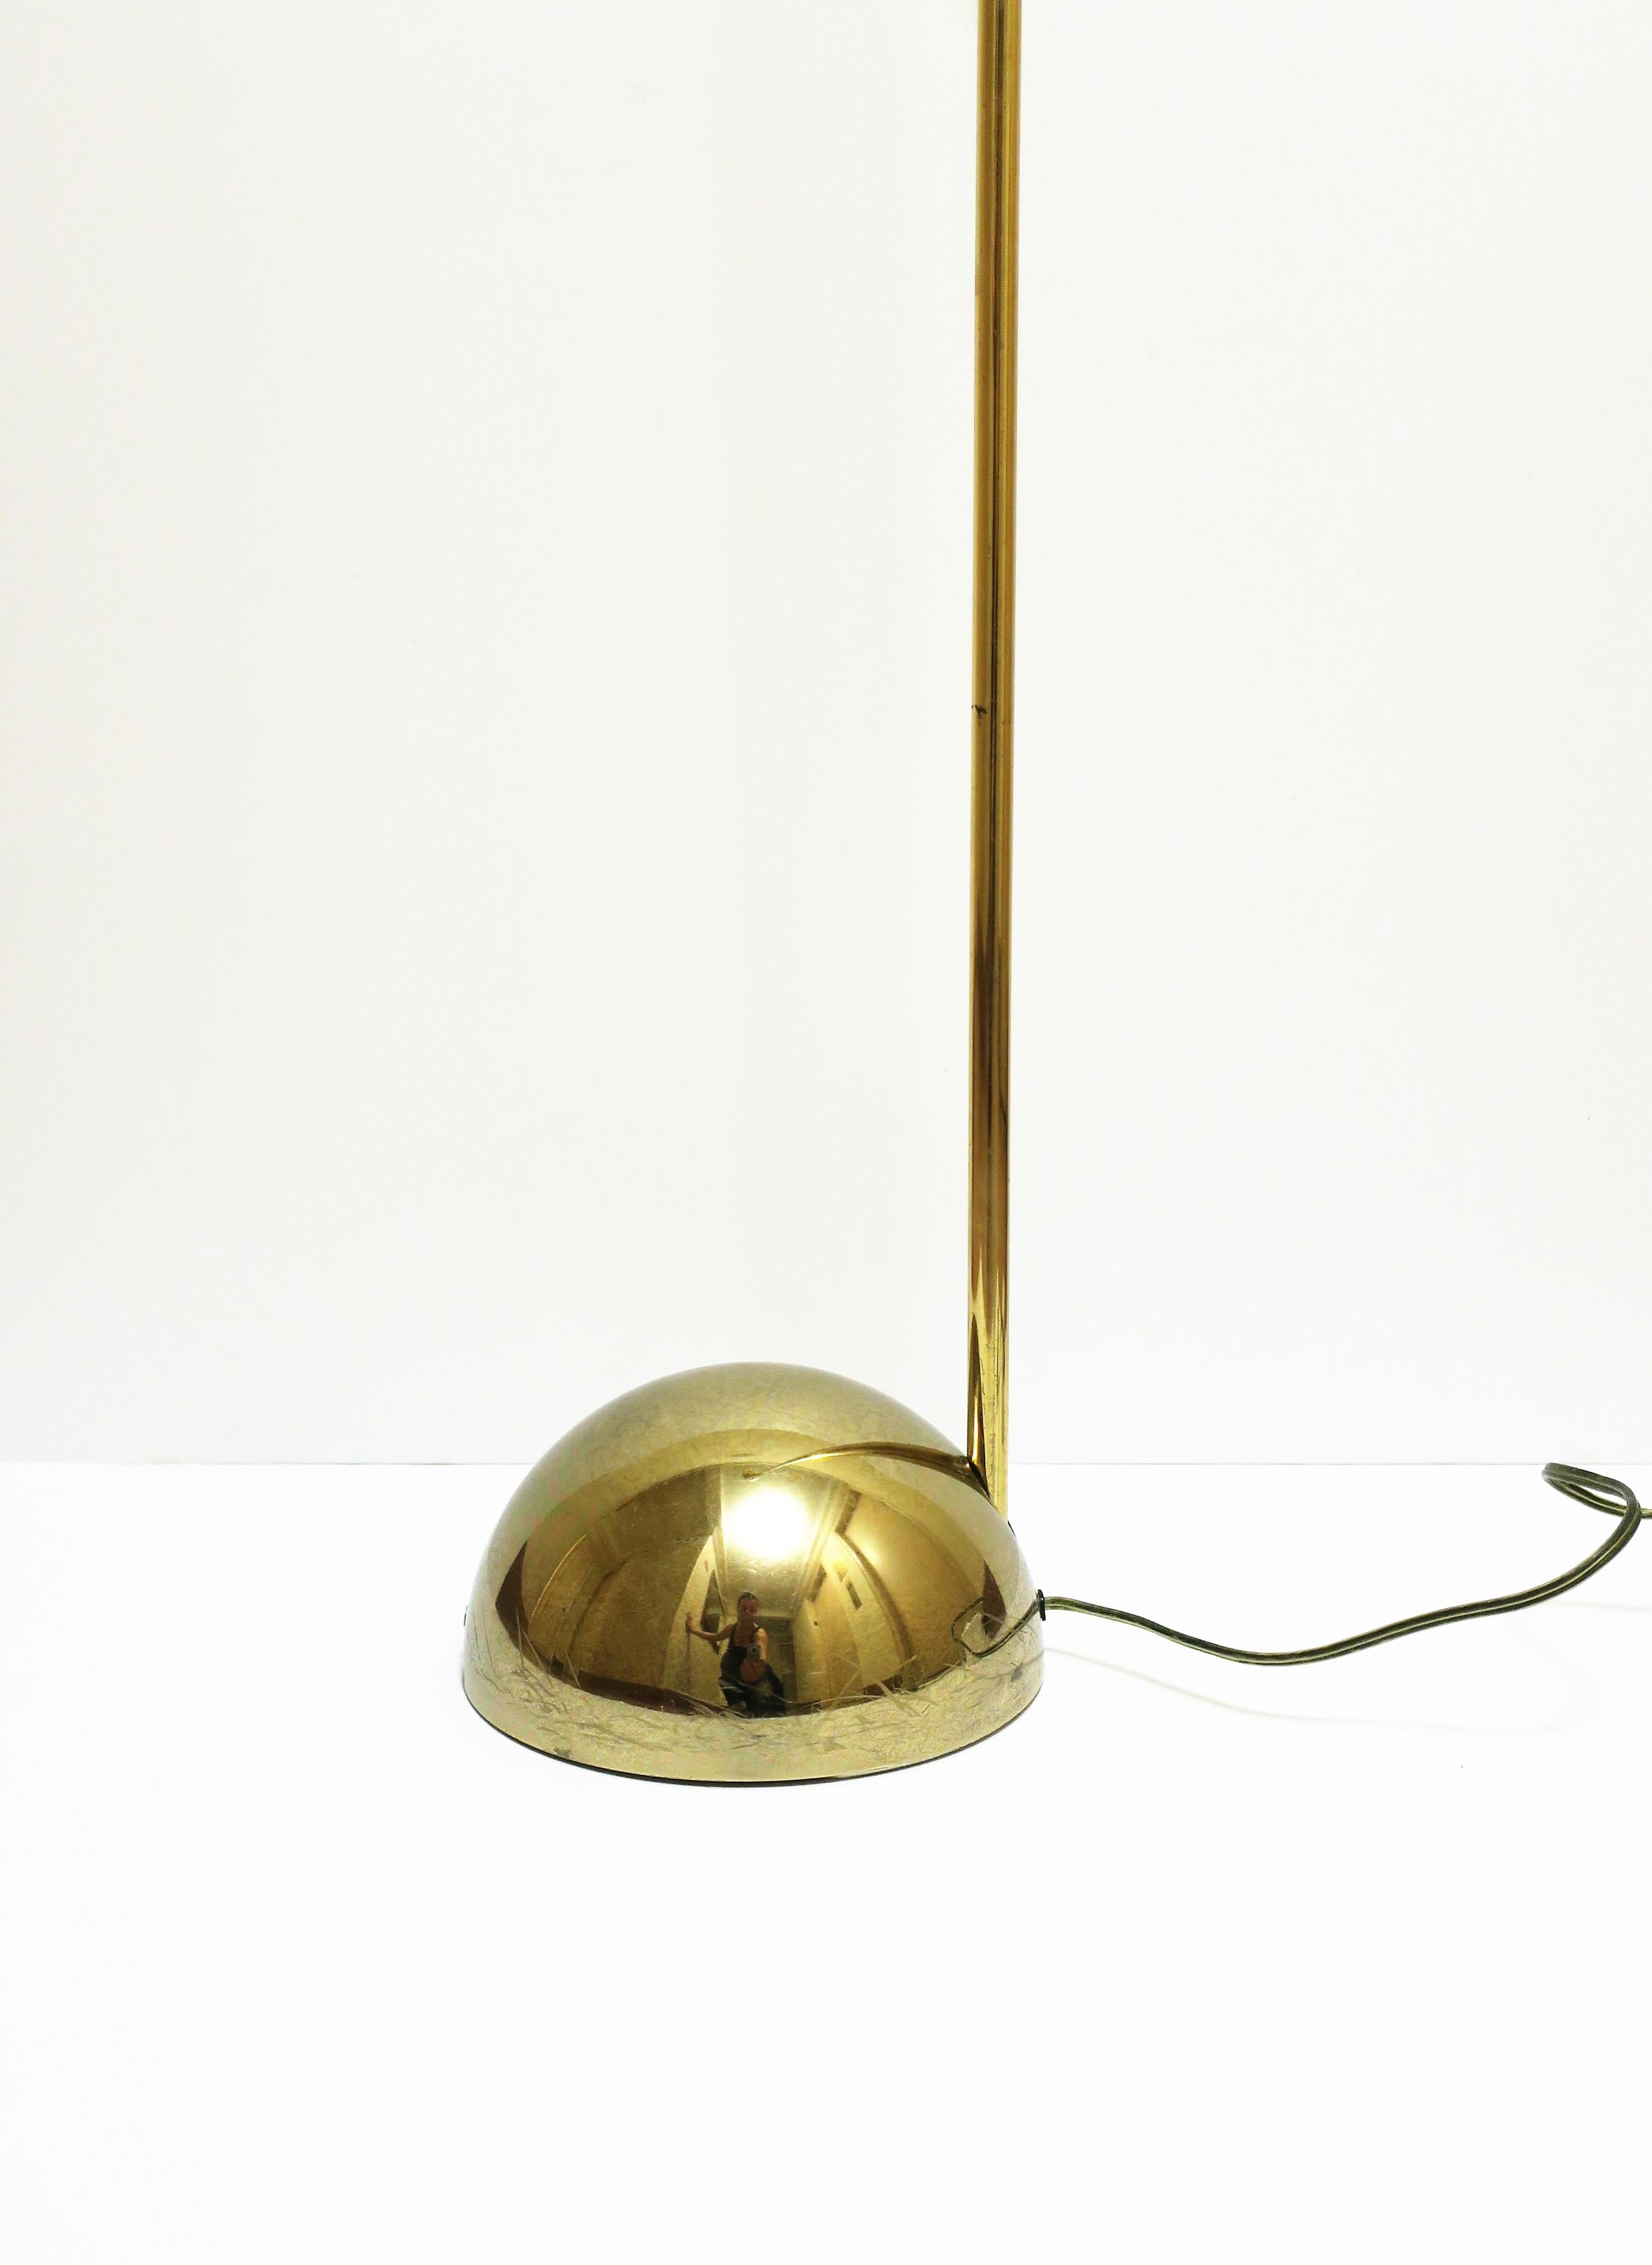 Modern Brass Plated Floor Lamp, circa 1970s For Sale 1